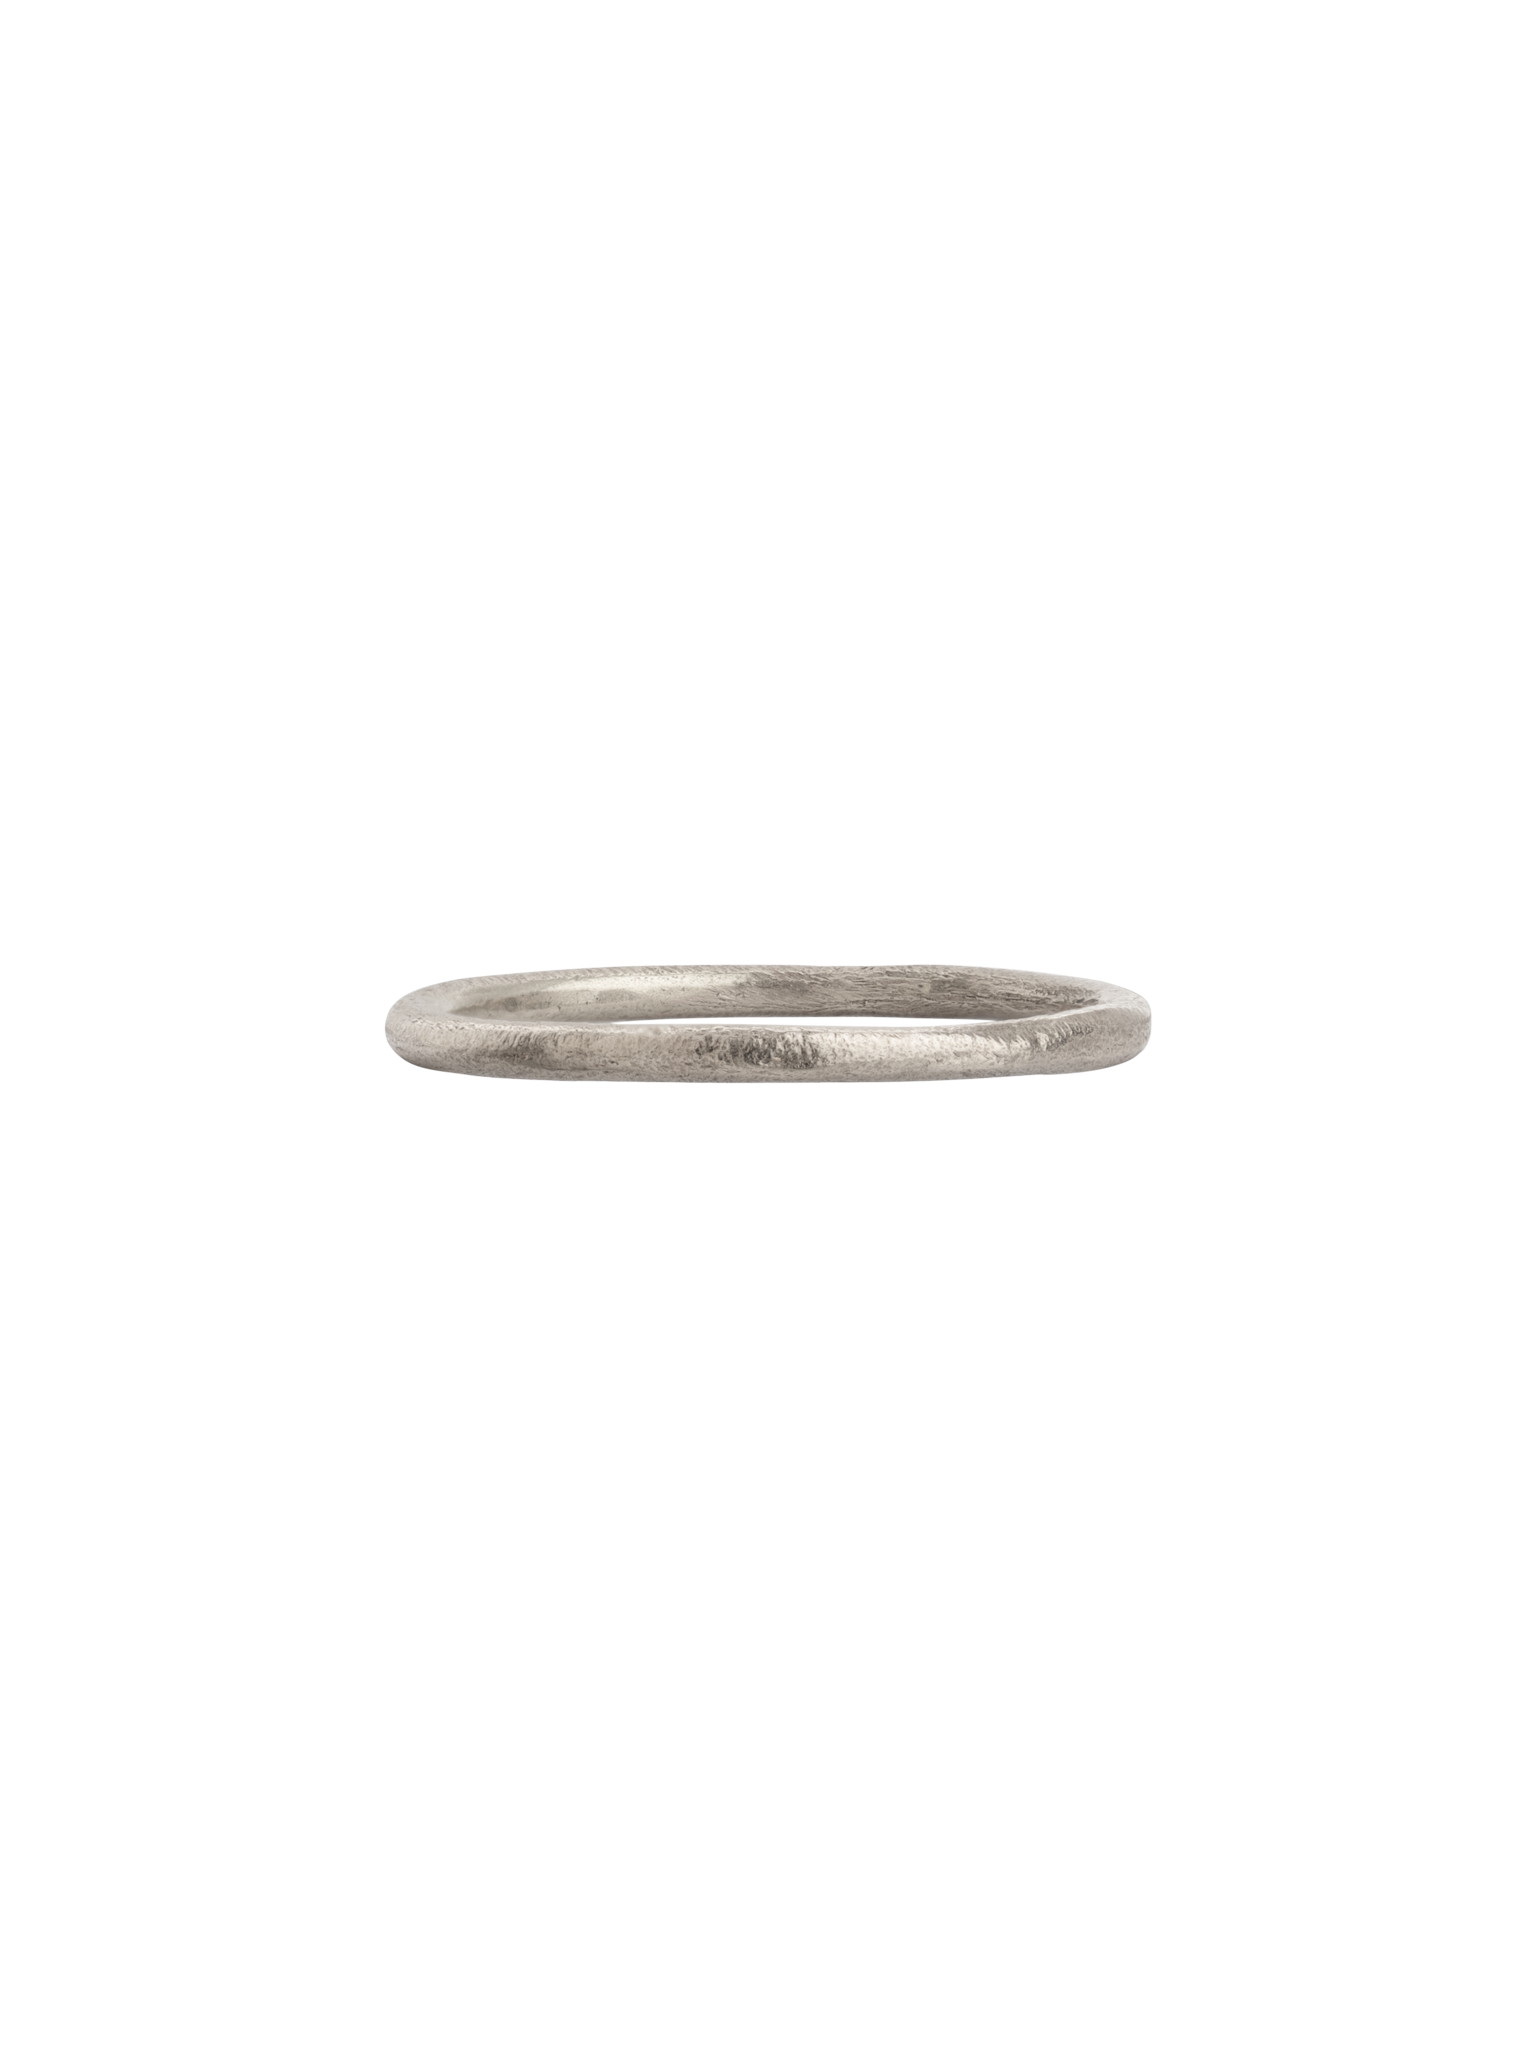 9ct white gold plain wedding band 1.5mm wide